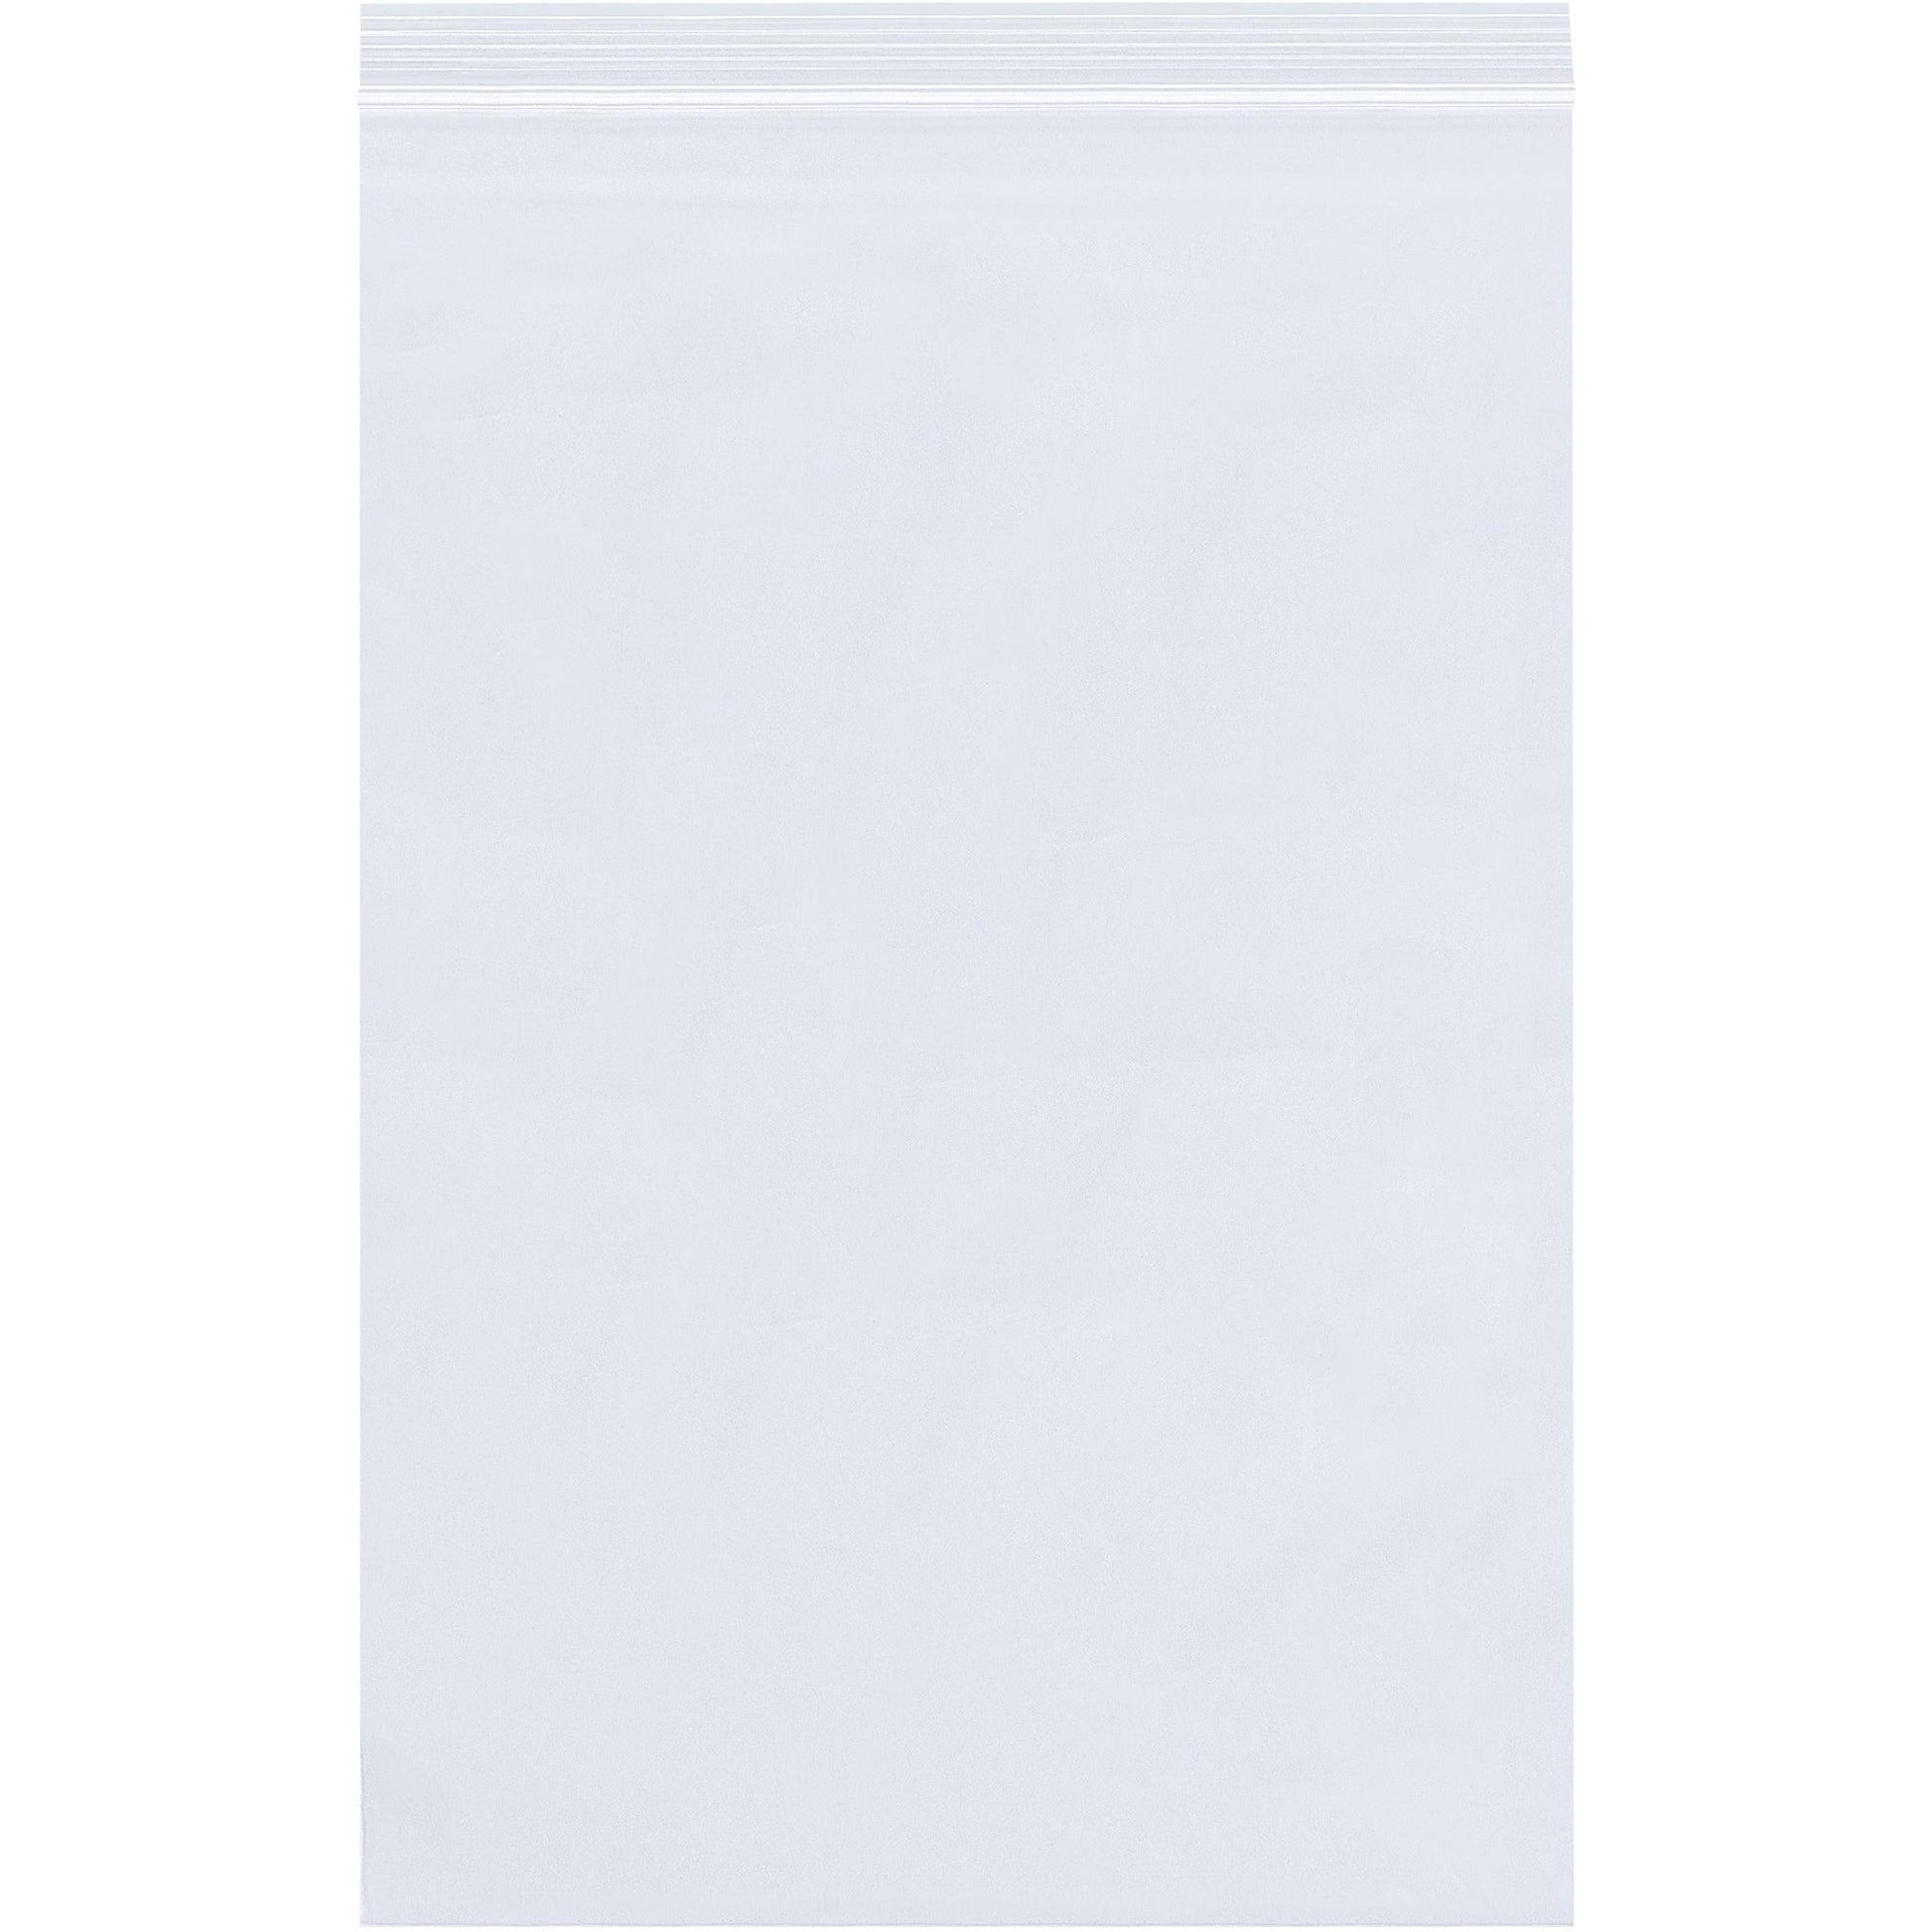 16 x 24" - 4 Mil Reclosable Poly Bags - PB3825